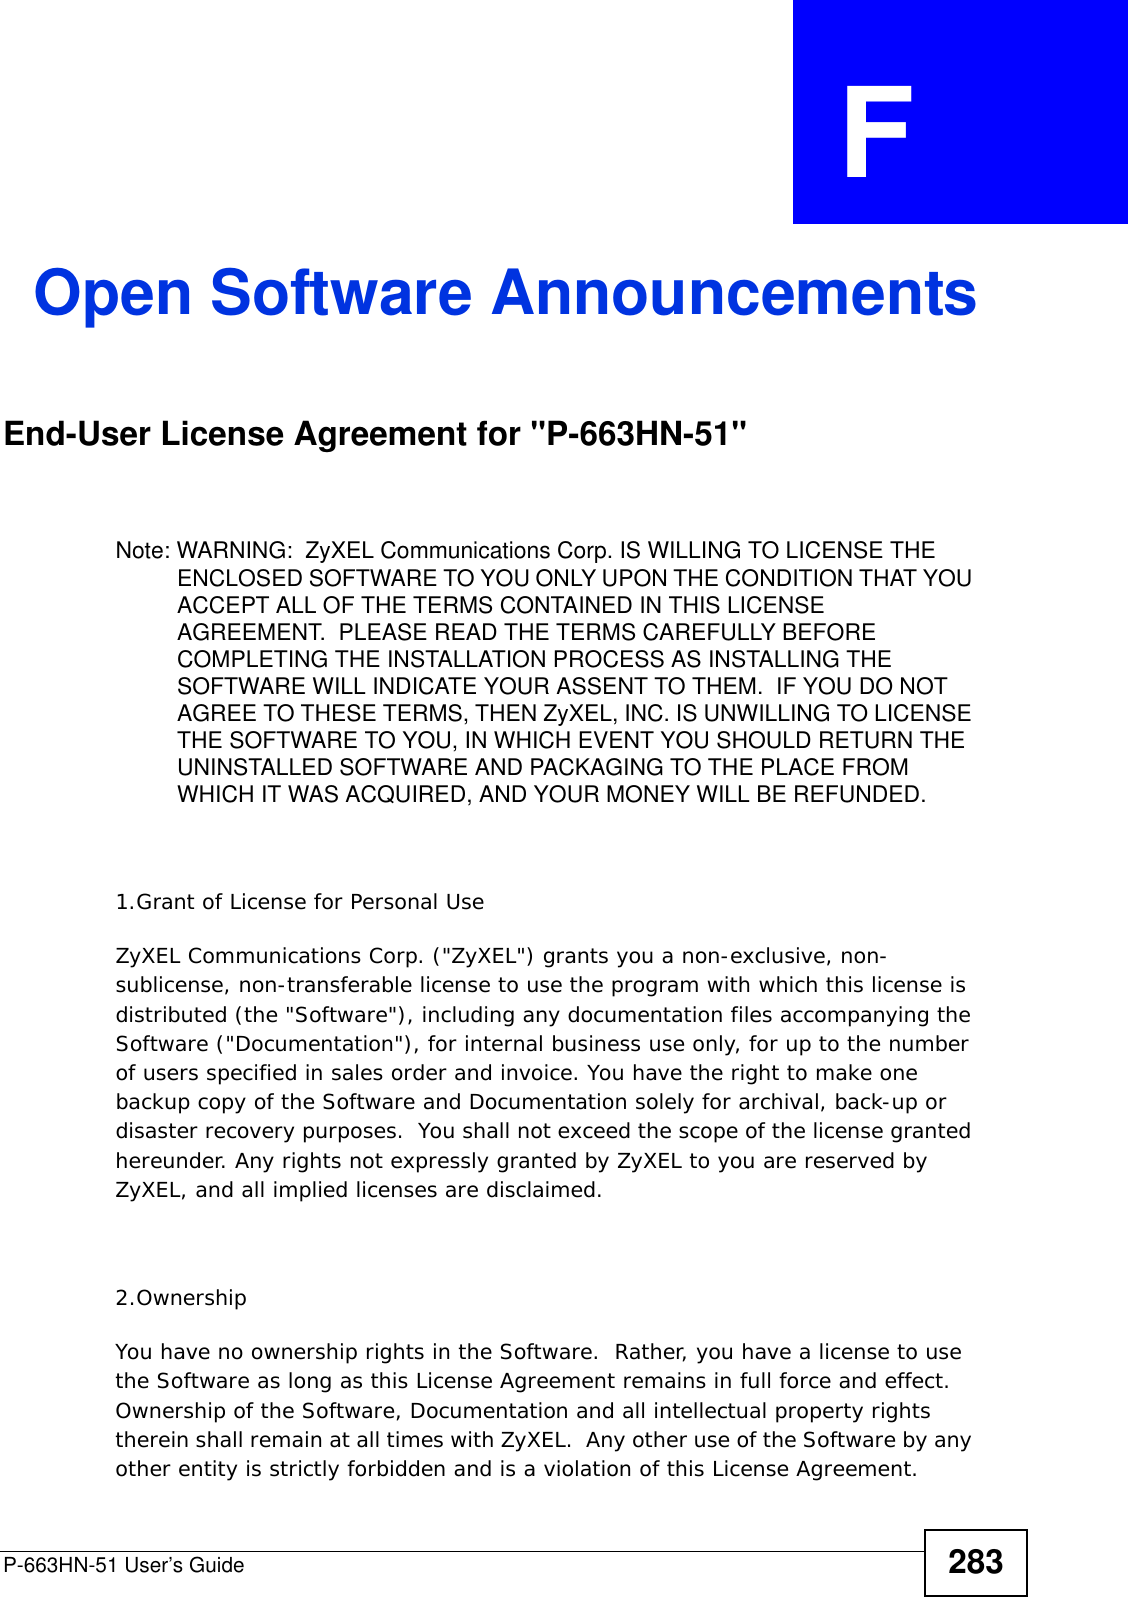 P-663HN-51 User’s Guide 283APPENDIX  F Open Software AnnouncementsEnd-User License Agreement for &quot;P-663HN-51&quot; Note: WARNING:  ZyXEL Communications Corp. IS WILLING TO LICENSE THE ENCLOSED SOFTWARE TO YOU ONLY UPON THE CONDITION THAT YOU ACCEPT ALL OF THE TERMS CONTAINED IN THIS LICENSE AGREEMENT.  PLEASE READ THE TERMS CAREFULLY BEFORE COMPLETING THE INSTALLATION PROCESS AS INSTALLING THE SOFTWARE WILL INDICATE YOUR ASSENT TO THEM.  IF YOU DO NOT AGREE TO THESE TERMS, THEN ZyXEL, INC. IS UNWILLING TO LICENSE THE SOFTWARE TO YOU, IN WHICH EVENT YOU SHOULD RETURN THE UNINSTALLED SOFTWARE AND PACKAGING TO THE PLACE FROM WHICH IT WAS ACQUIRED, AND YOUR MONEY WILL BE REFUNDED.1.Grant of License for Personal UseZyXEL Communications Corp. (&quot;ZyXEL&quot;) grants you a non-exclusive, non-sublicense, non-transferable license to use the program with which this license is distributed (the &quot;Software&quot;), including any documentation files accompanying the Software (&quot;Documentation&quot;), for internal business use only, for up to the number of users specified in sales order and invoice. You have the right to make one backup copy of the Software and Documentation solely for archival, back-up or disaster recovery purposes.  You shall not exceed the scope of the license granted hereunder. Any rights not expressly granted by ZyXEL to you are reserved by ZyXEL, and all implied licenses are disclaimed.2.OwnershipYou have no ownership rights in the Software.  Rather, you have a license to use the Software as long as this License Agreement remains in full force and effect.  Ownership of the Software, Documentation and all intellectual property rights therein shall remain at all times with ZyXEL.  Any other use of the Software by any other entity is strictly forbidden and is a violation of this License Agreement.